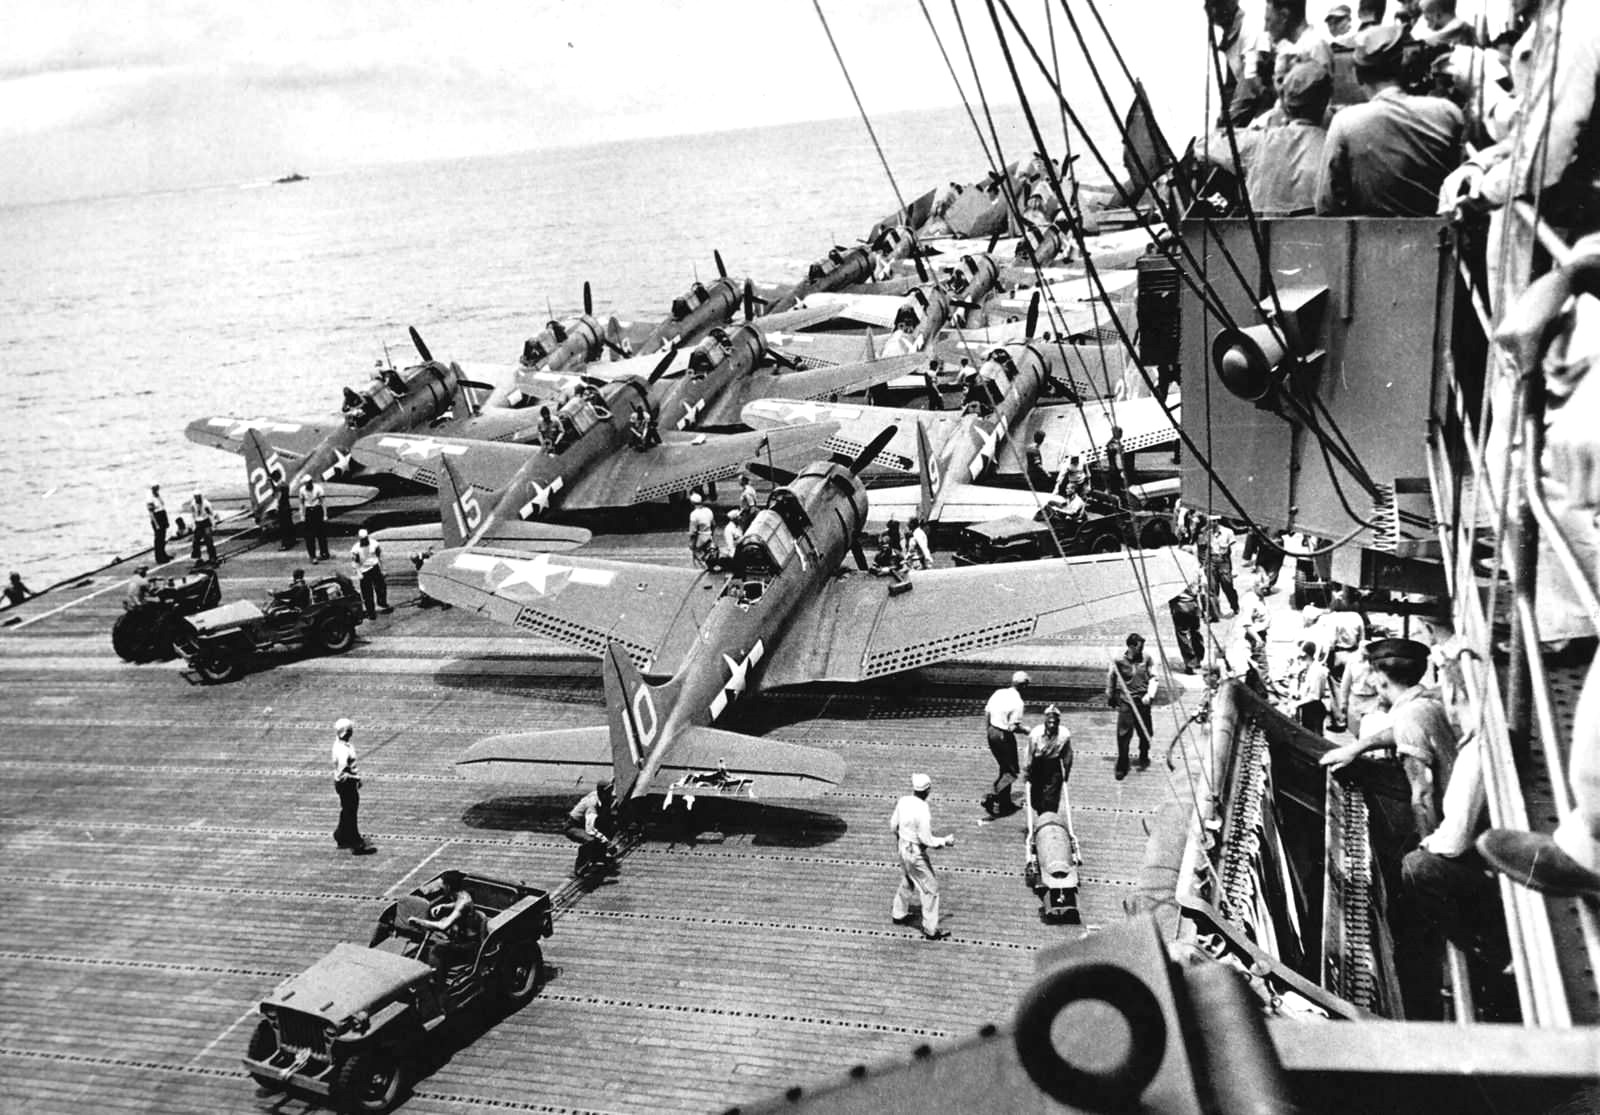 Jeep vehicles and SBD Dauntless aircraft aboard an aircraft carrier in the Solomon Islands area, 5 Nov 1943